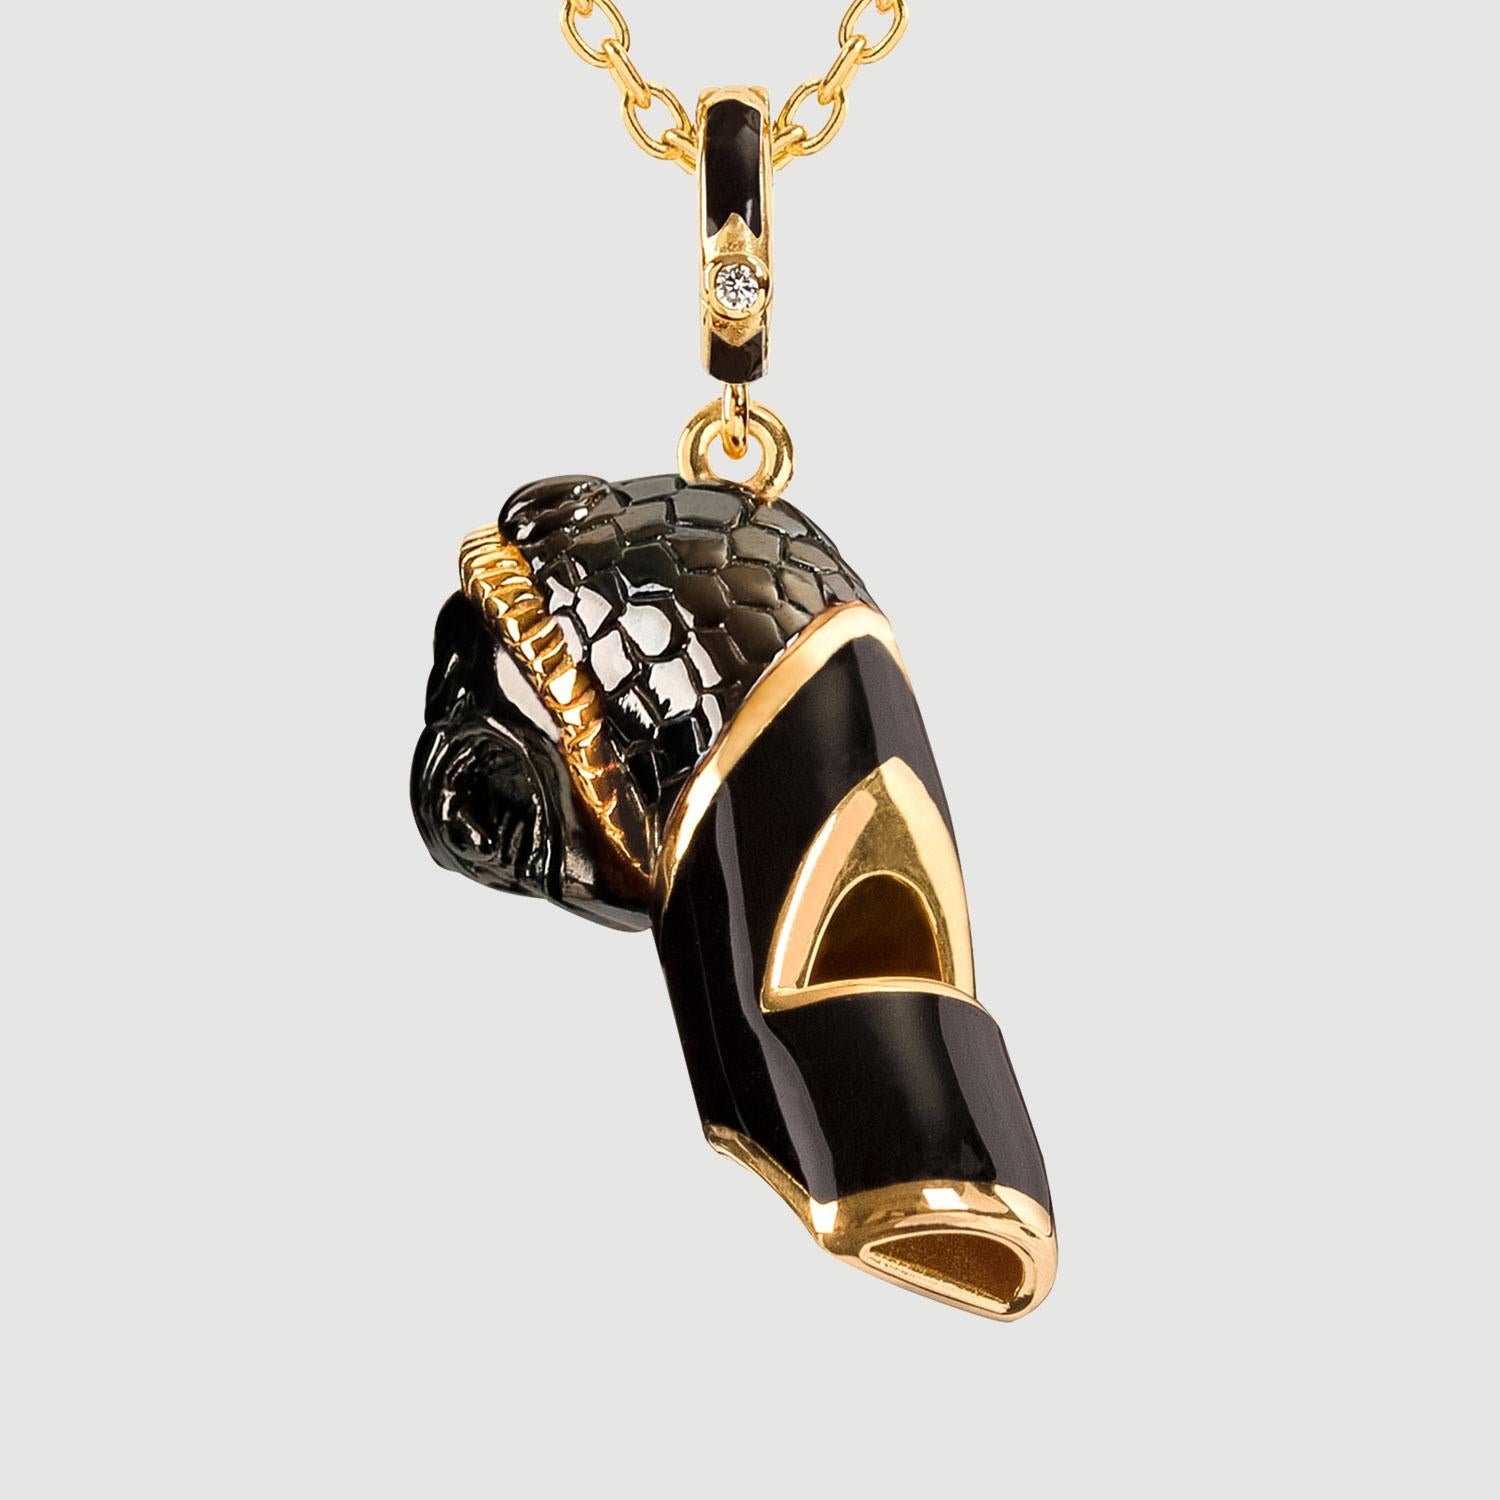 Introducing our exquisite Gold Vermeil Lion of Babylon Whistle Pendant Necklace - a modern twist on the classic antique dog whistle. This beautiful piece is not only a stunning jewelry design, but also a fully functional whistle that produces a high